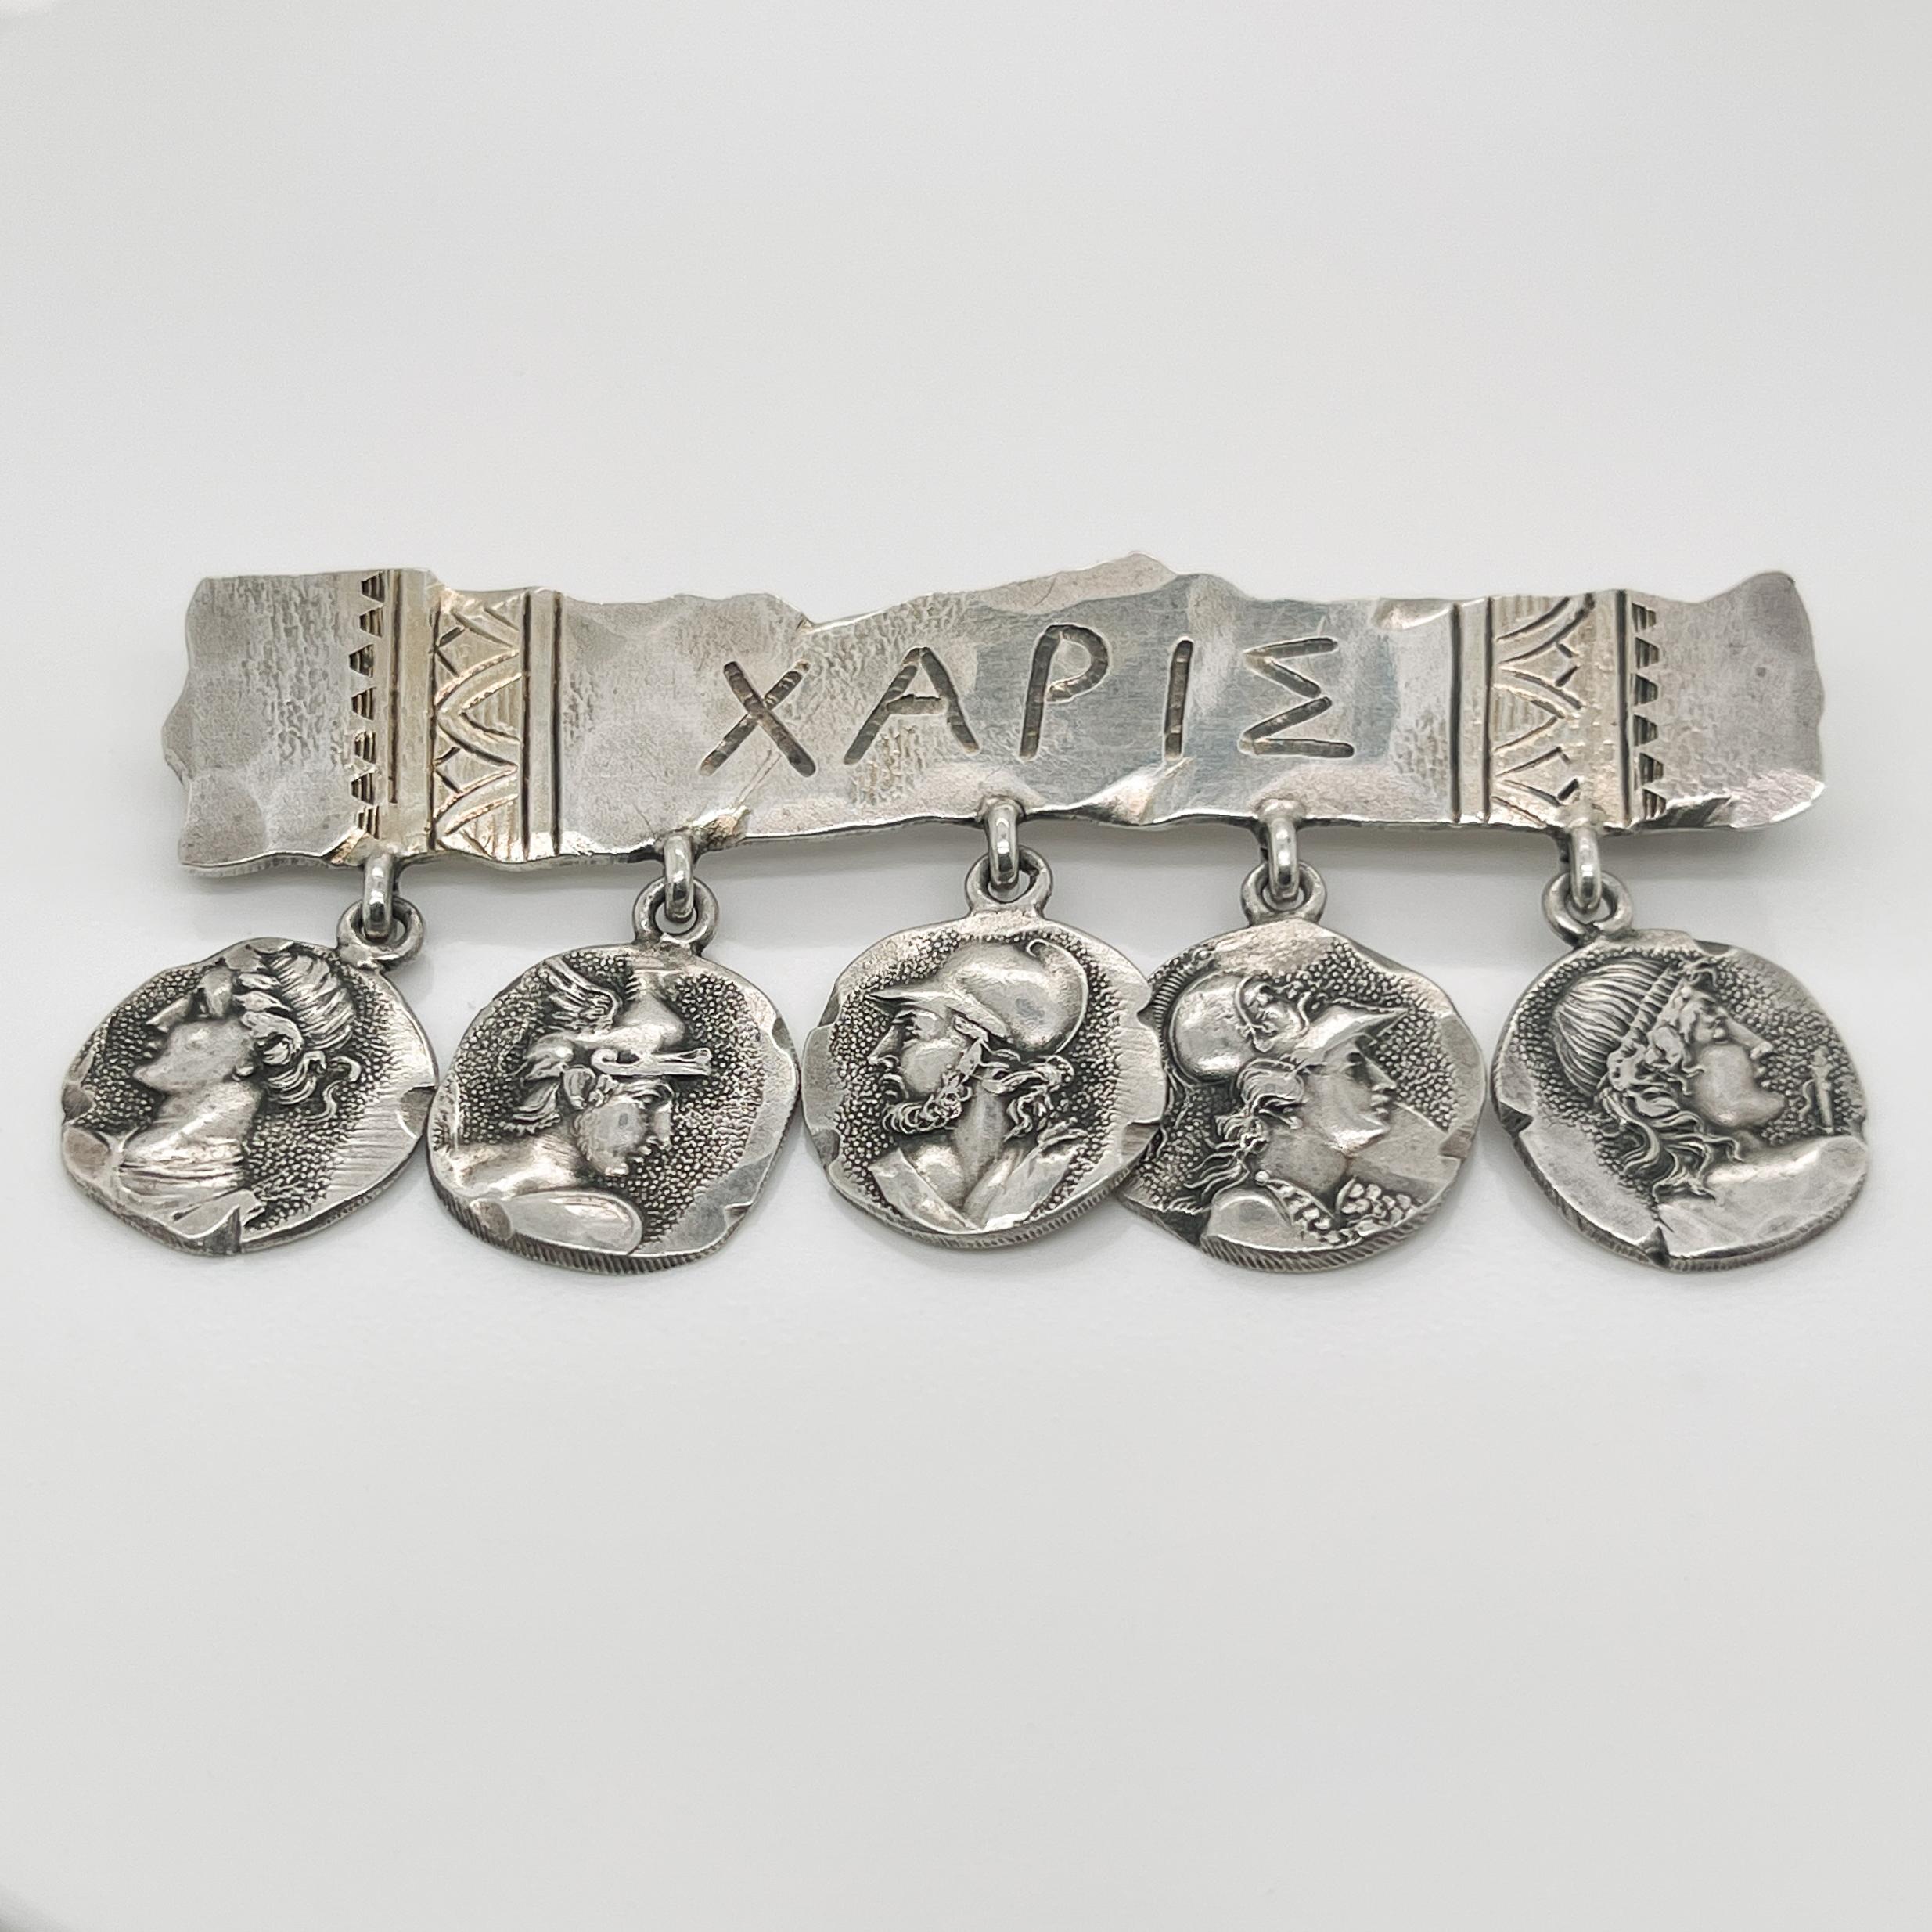 A very fine George Shiebler Etruscan brooch.

In sterling silver.

With five medallions suspended from a bar stamped XAPIE.

Simply a wonderful piece of American Aesthetic Movement jewelry!

Date:
19th Century

Overall Condition:
It is in overall